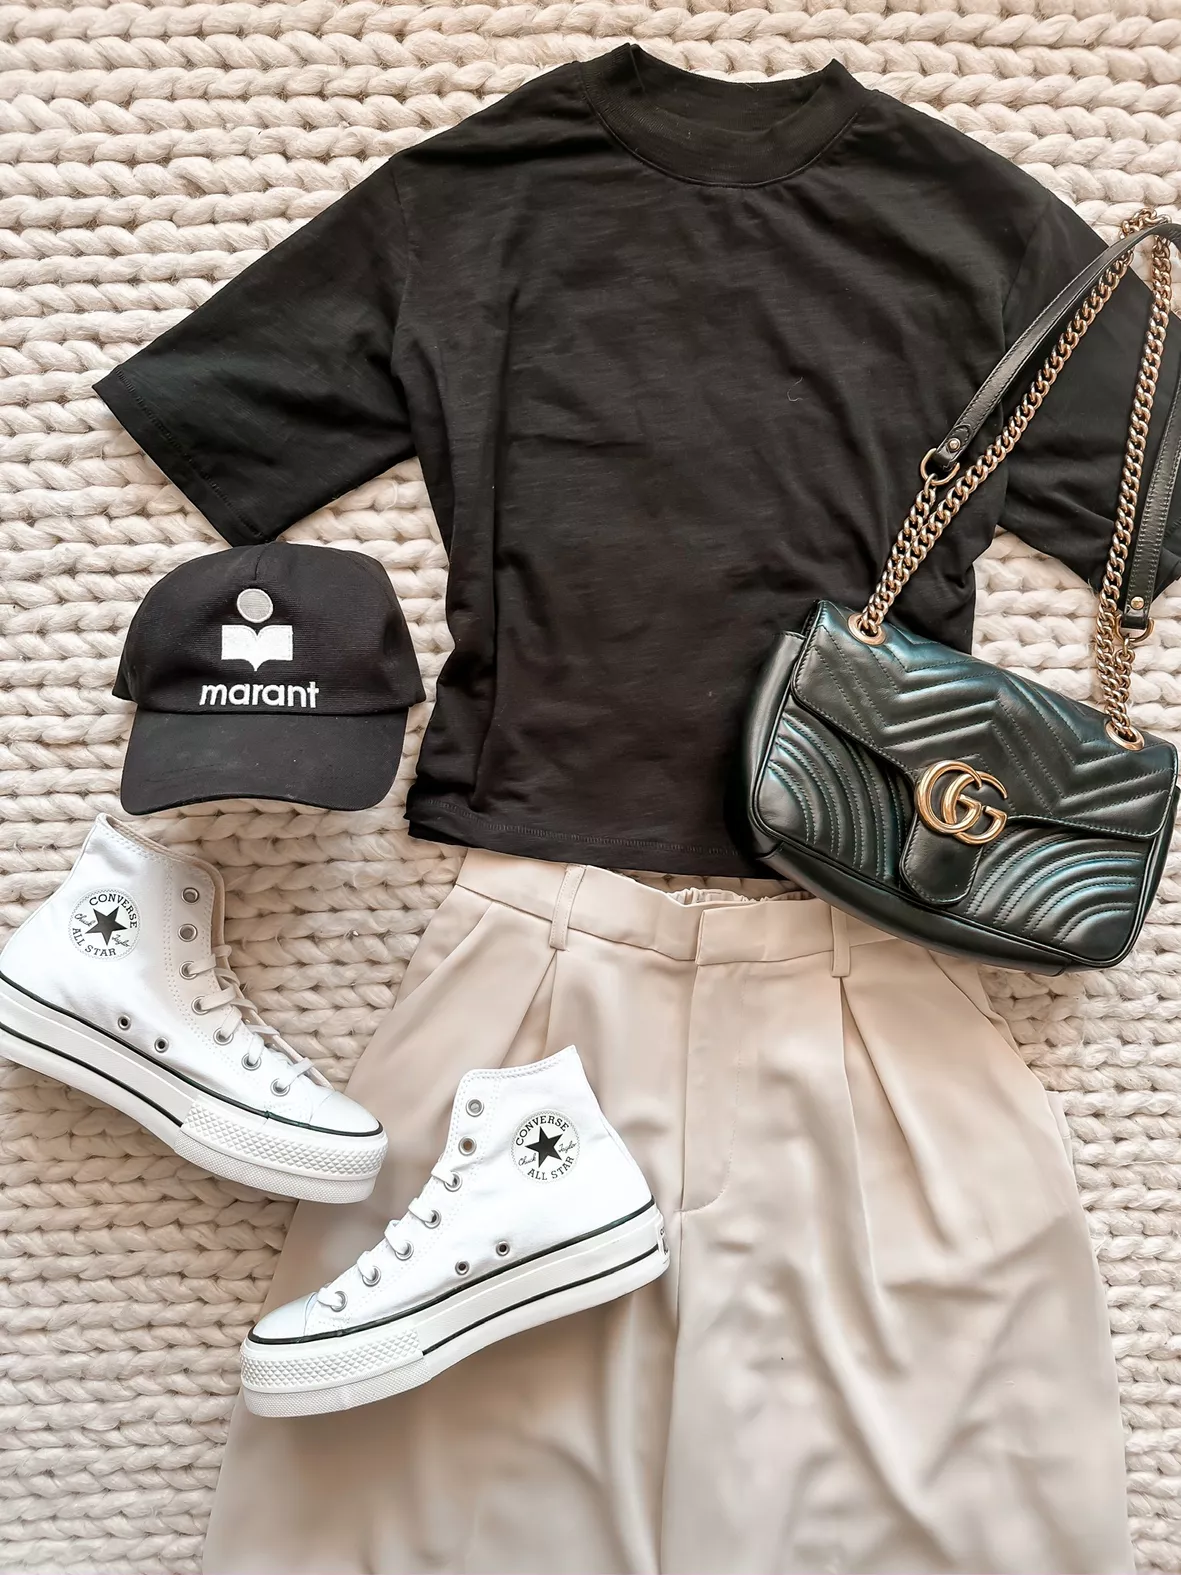 With my mini bag.  Converse sneakers outfit, Sneakers outfit, Mini bag